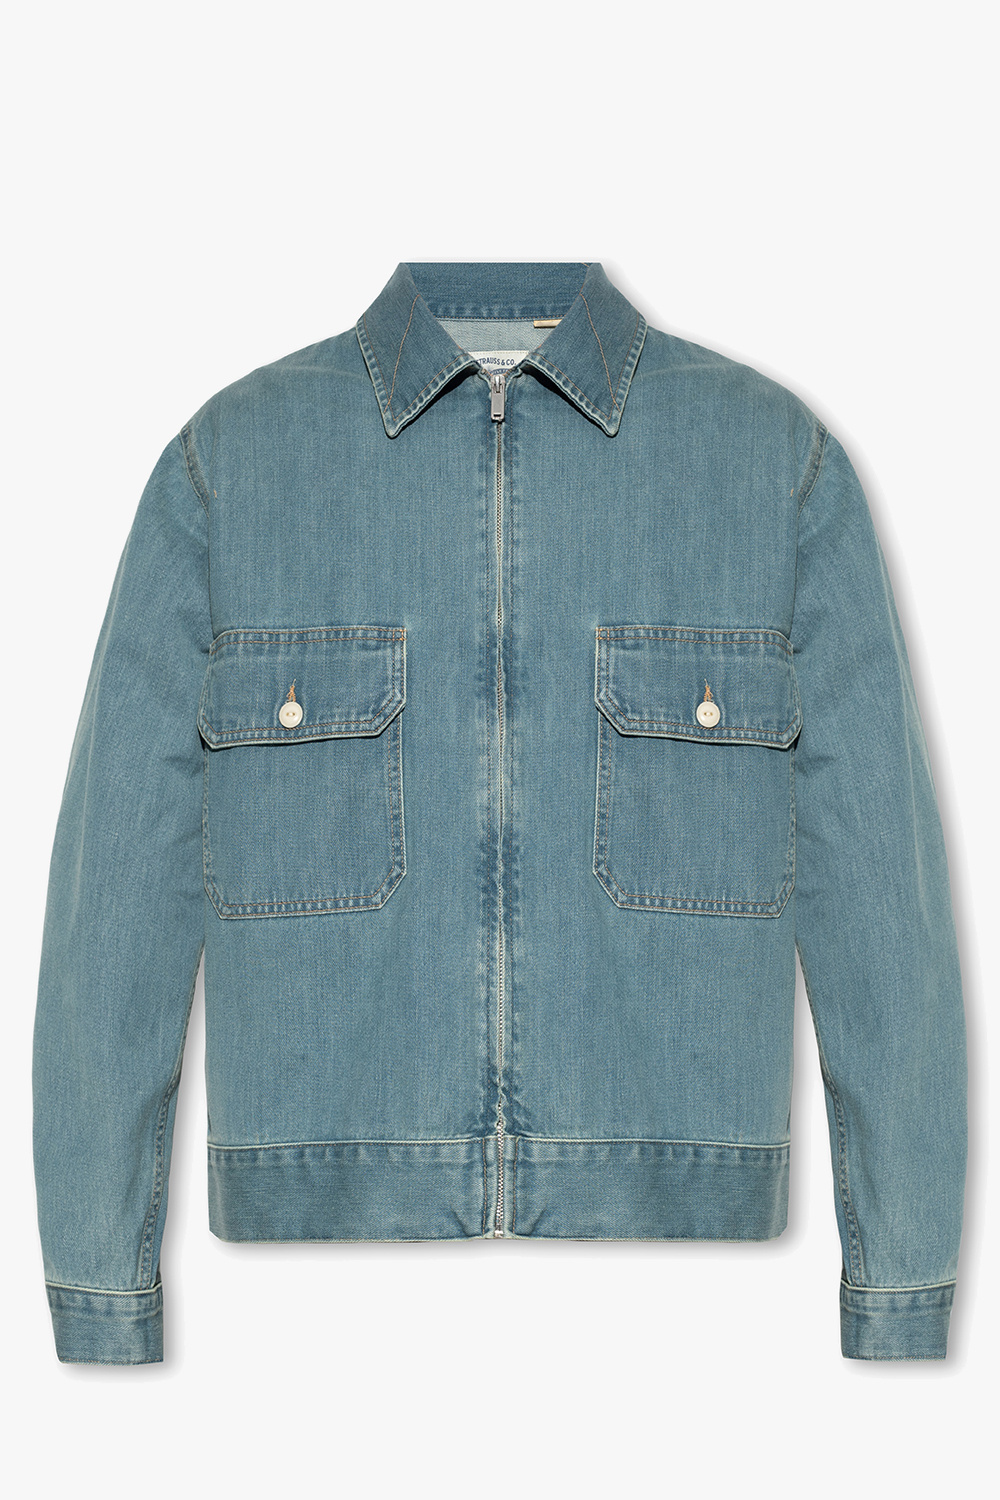 Blue Denim jacket ‘Made & Crafted®’ collection Levi's - Vitkac GB